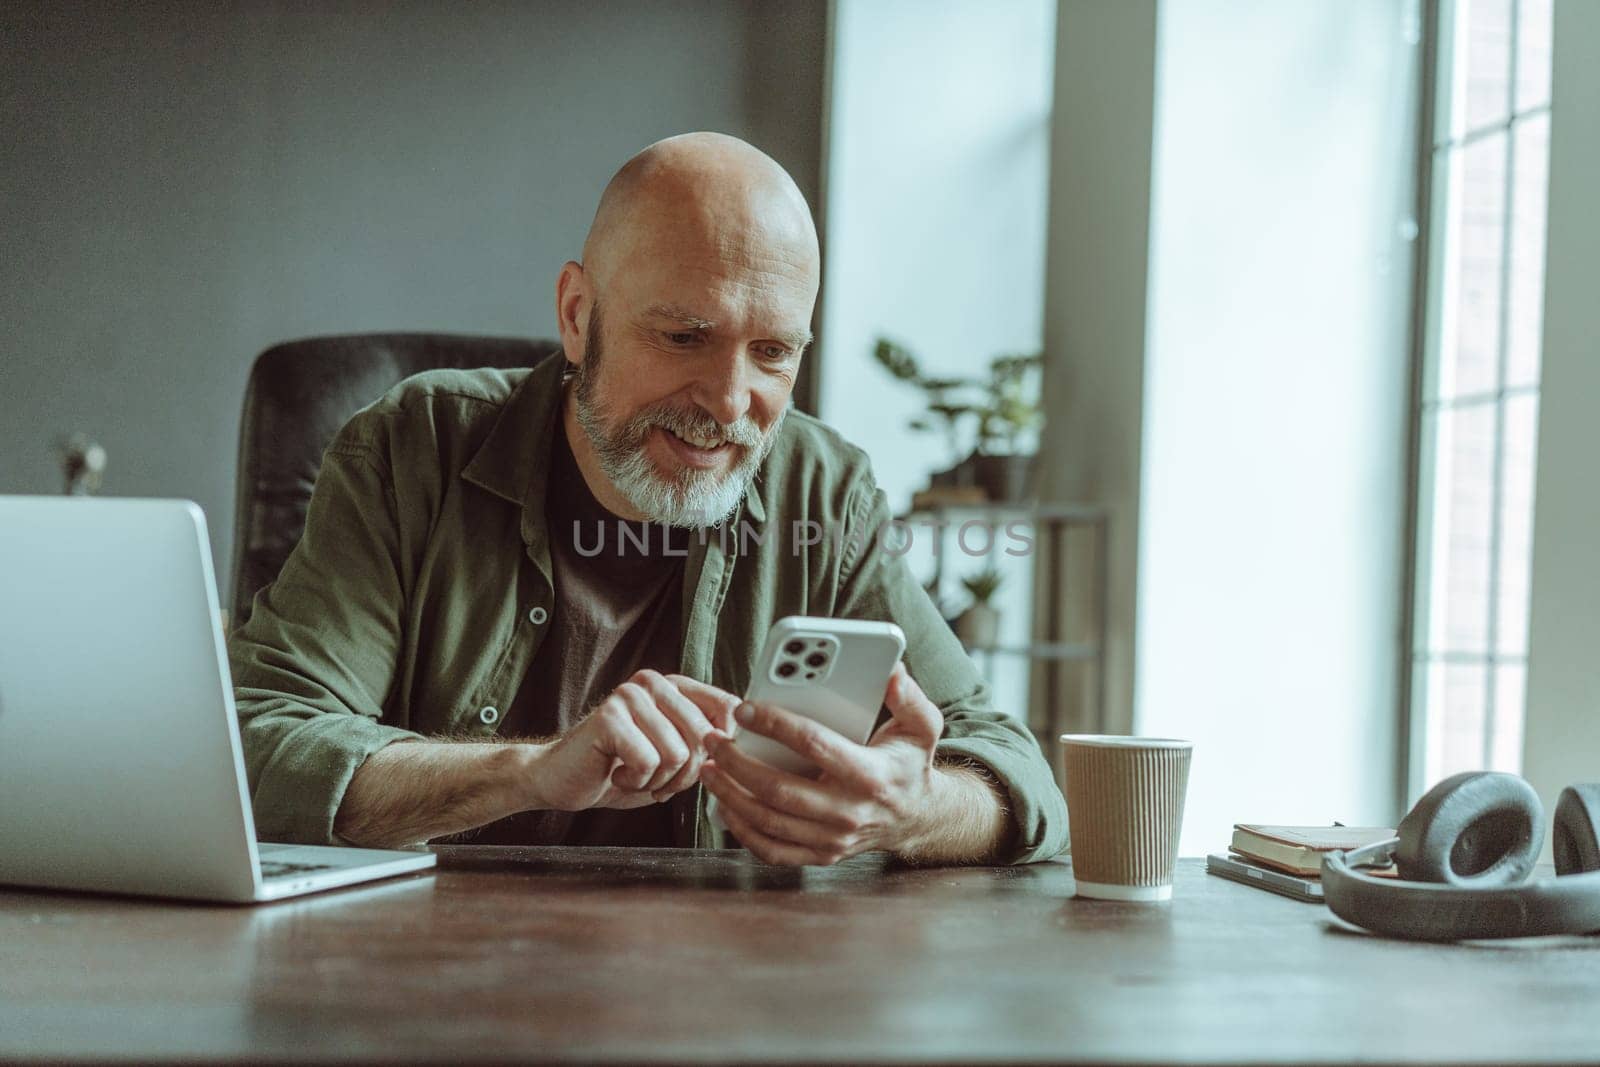 Mature old man comfortably seated home, actively engaged in texting message on phone. Desk adorned with laptop, headphones, and cup of coffee, indicating setup conducive to work and relaxation. . High quality photo